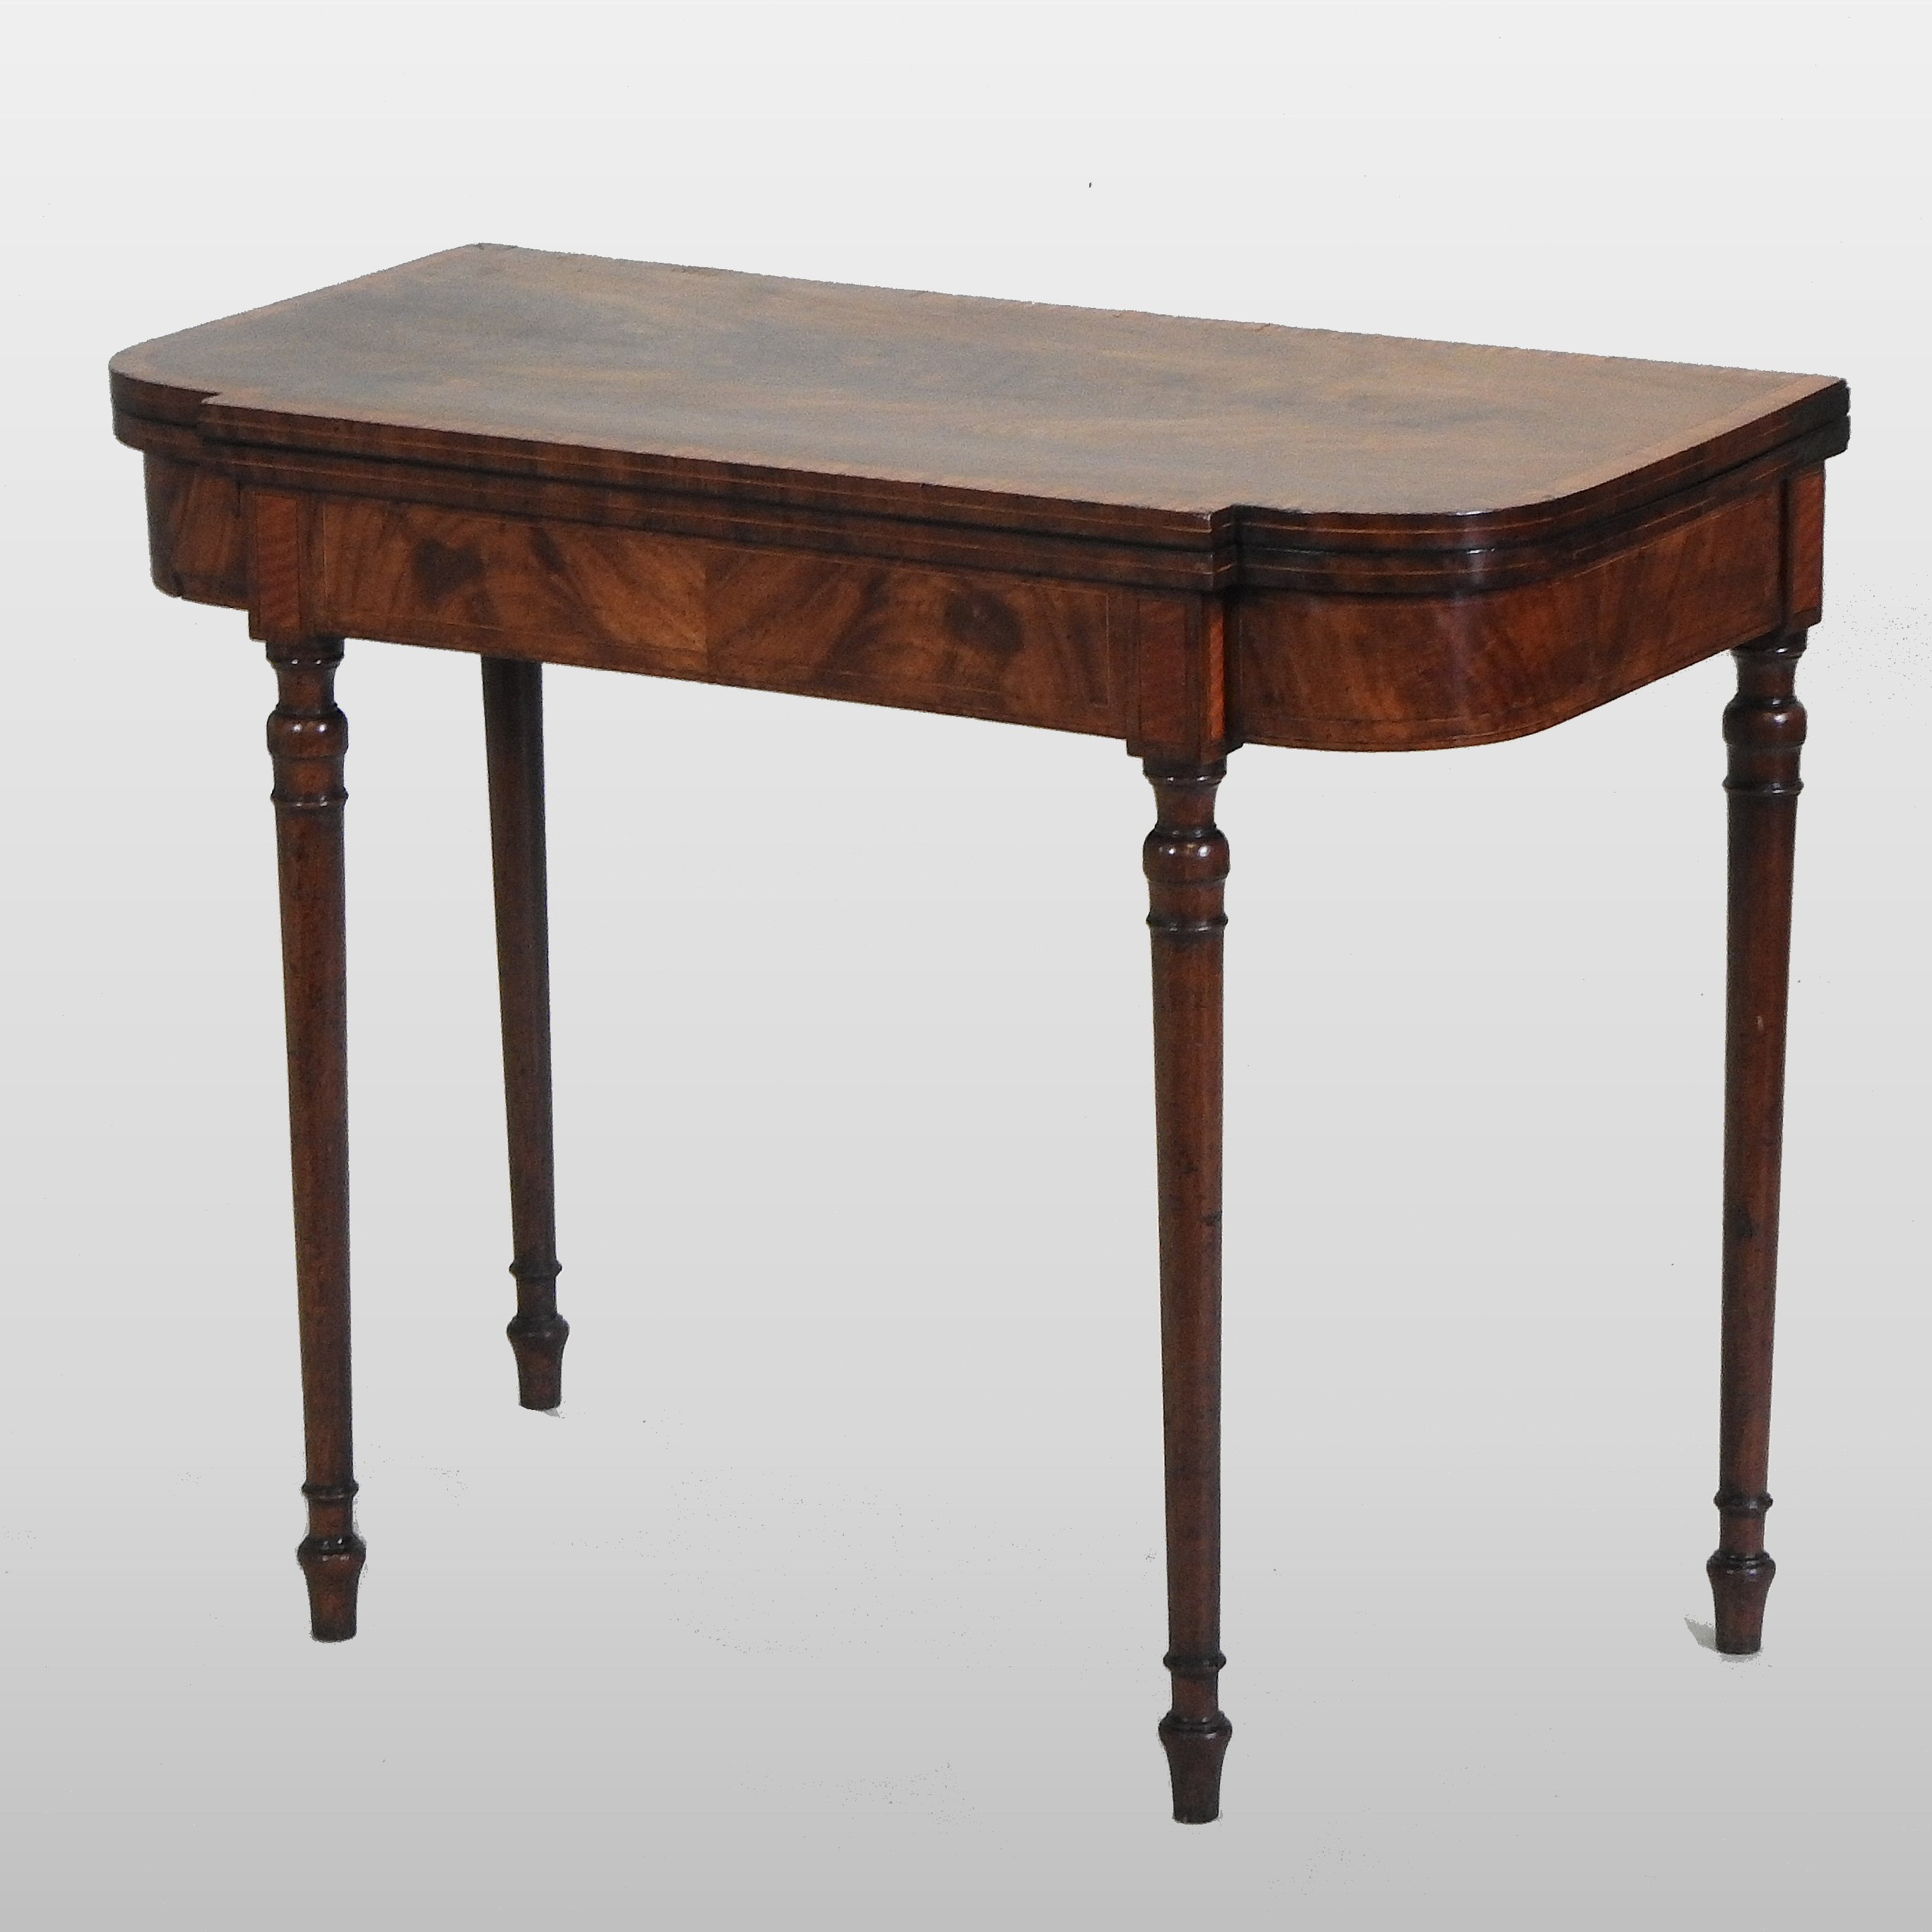 A George III mahogany and satinwood crossbanded folding card table, with a hinged breakfront top,